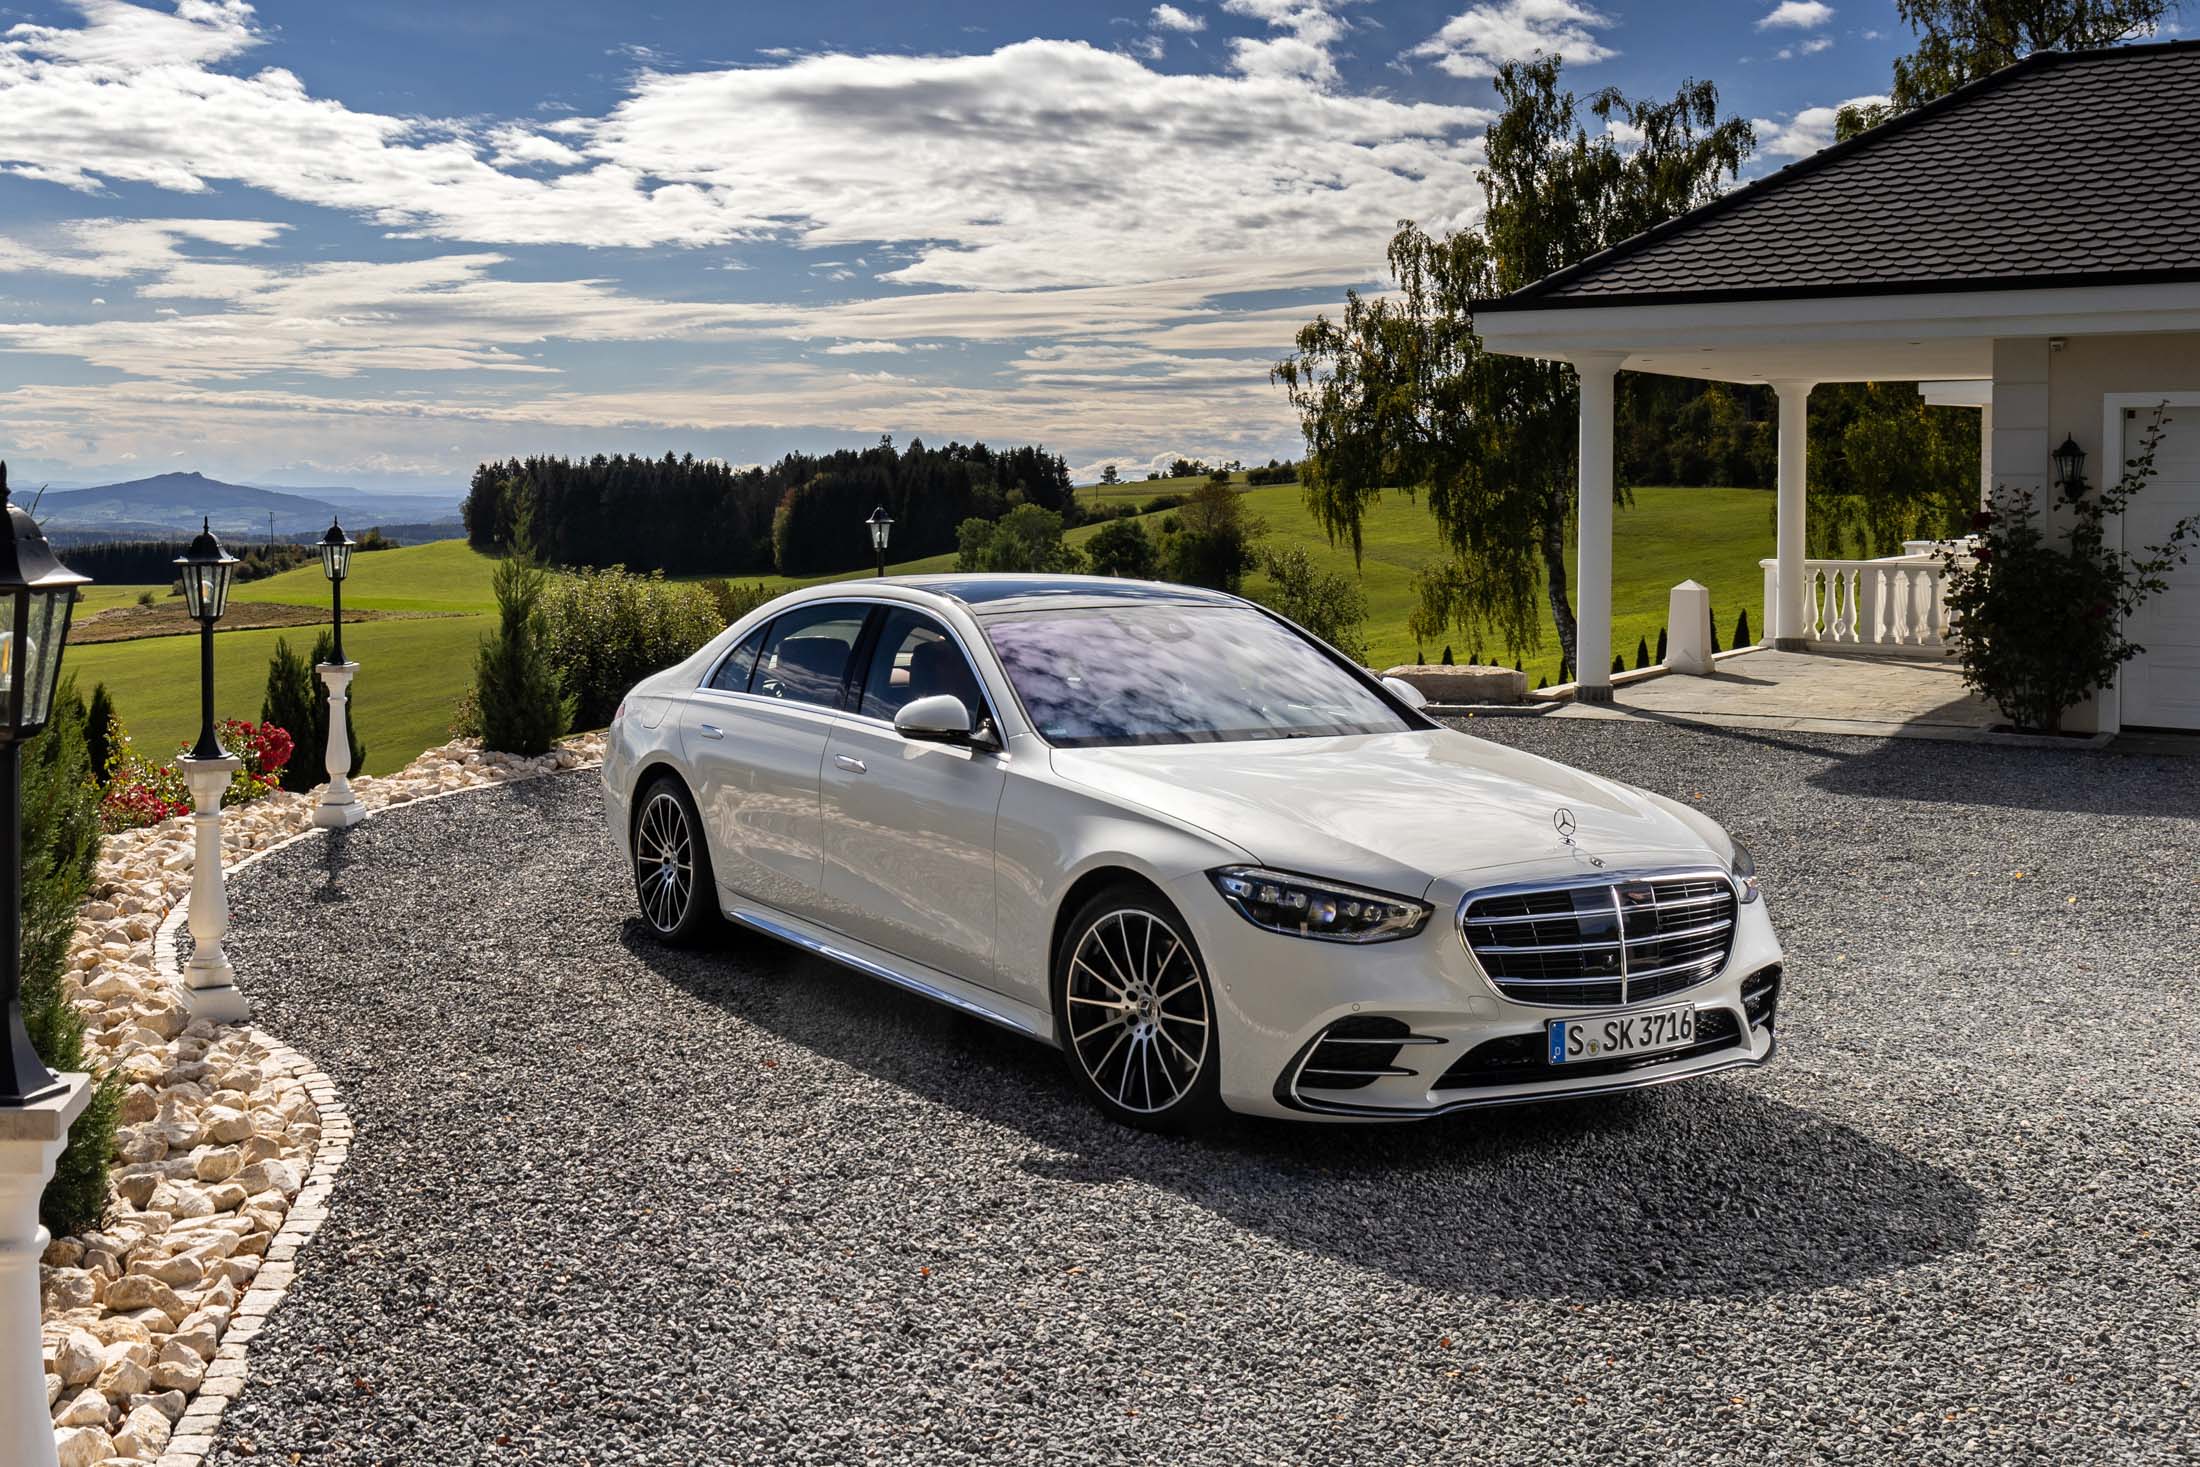 2021 Mercedes Benz S Class Sedan Review The Best In Its Segment Bloomberg